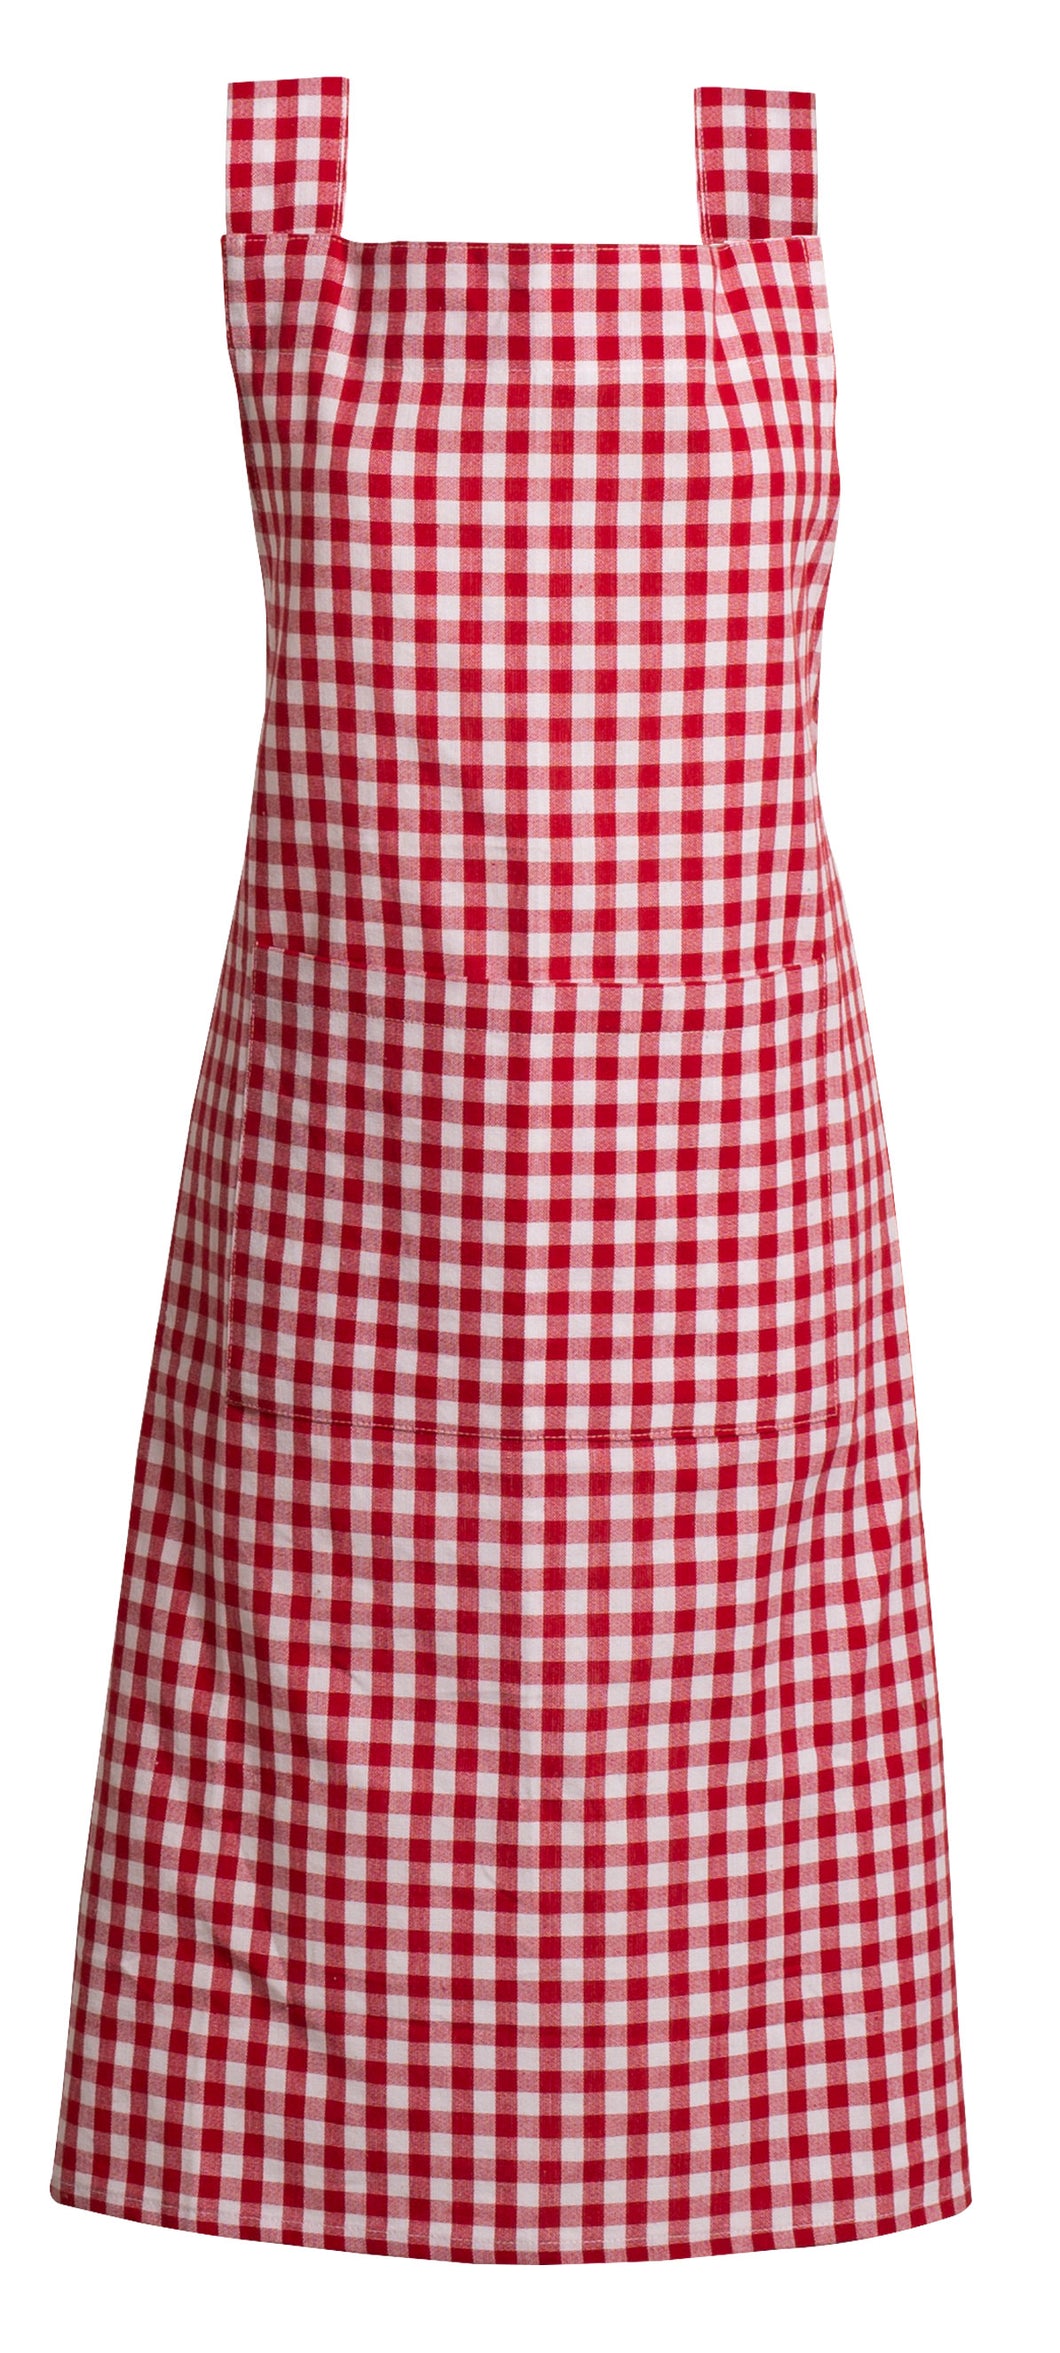 Gingham Check Aprons 100% Cotton by RANS